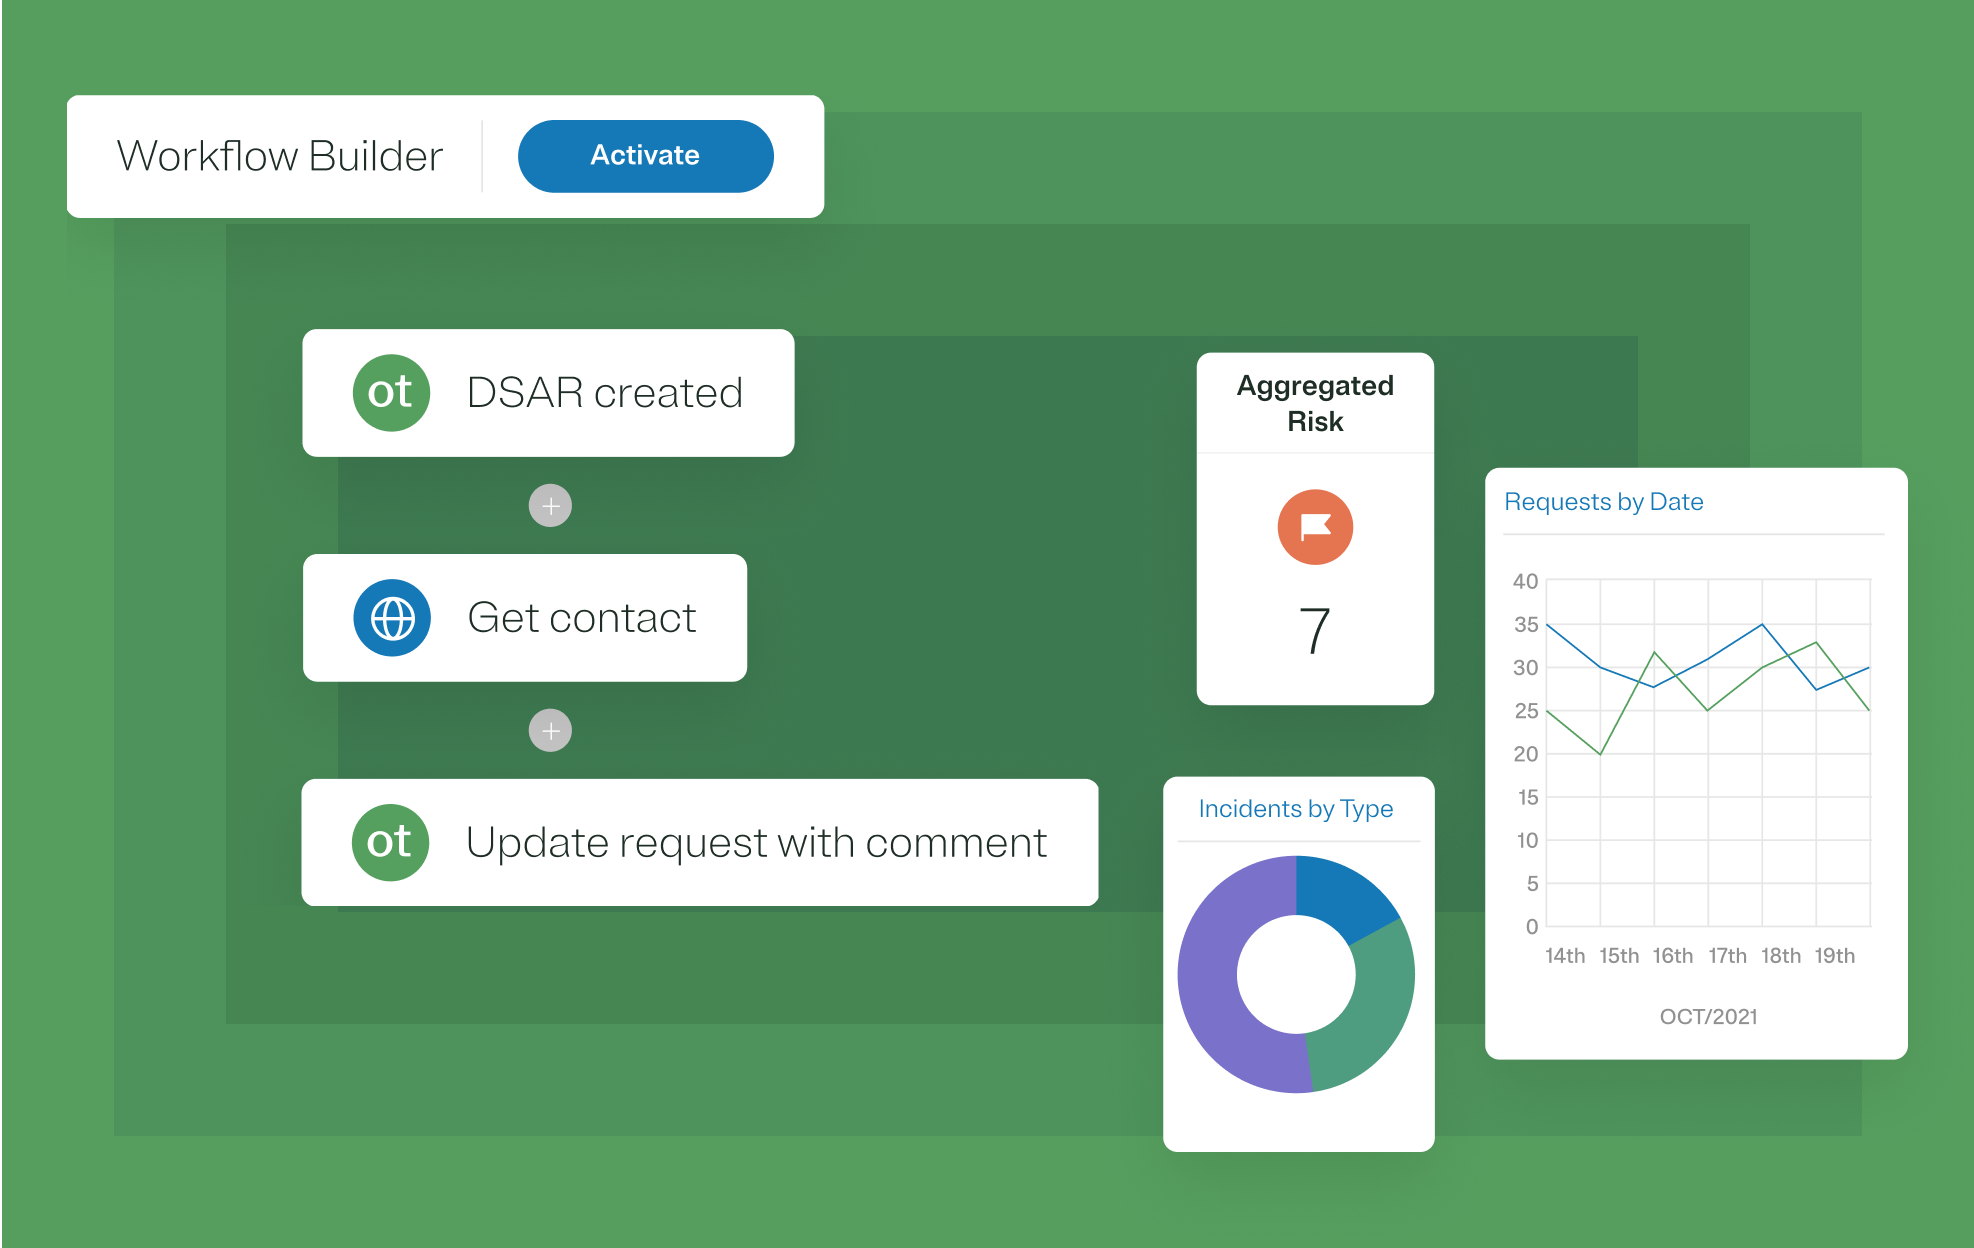 Illustration of OneTrust's privacy management features, including a workflow builder and dashboard metrics